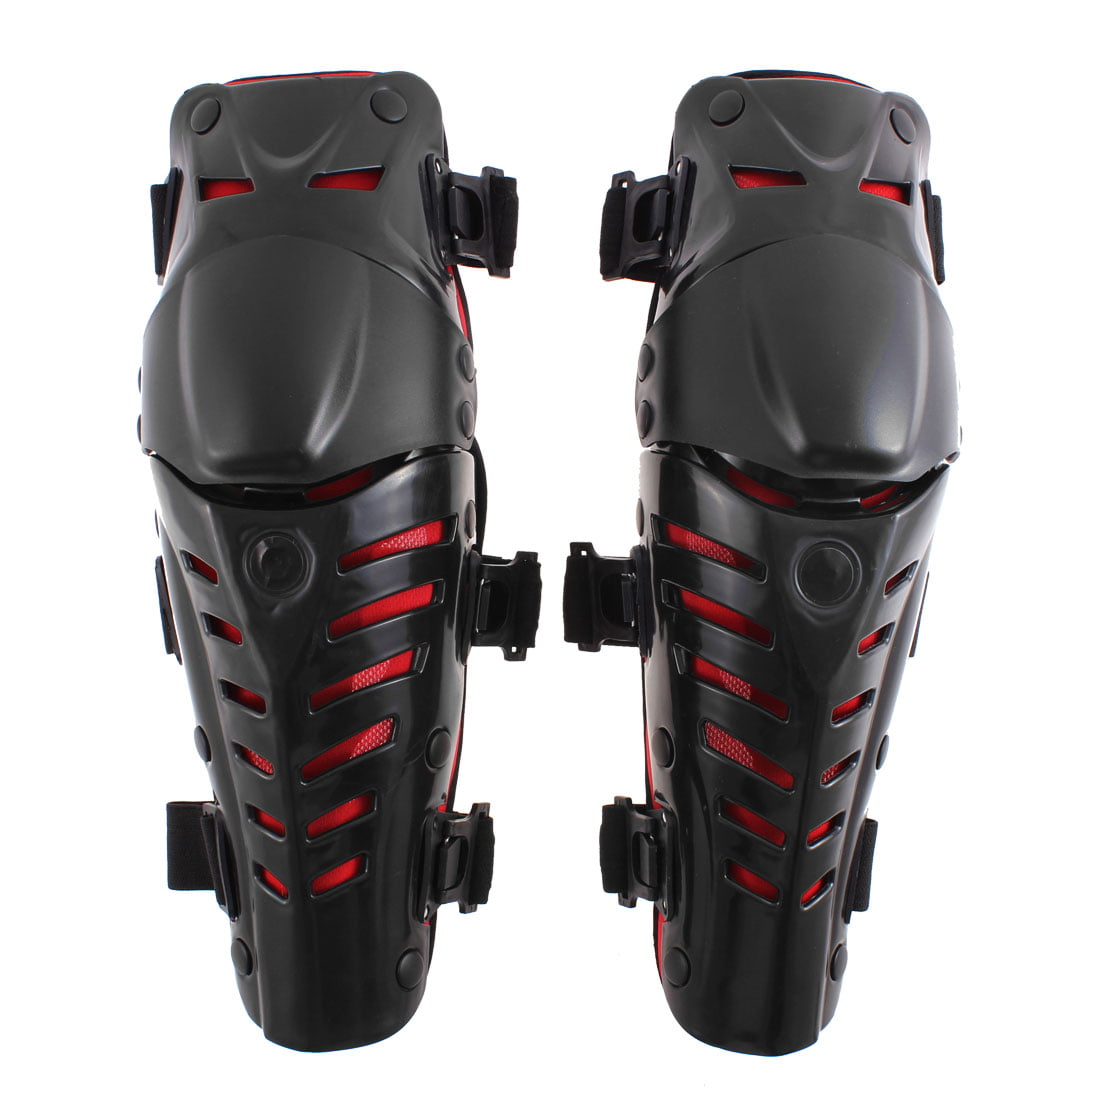 4X Shin Armor Elbow Knee Protector Guard Pads Cover for Motorcycle Bike Racing 